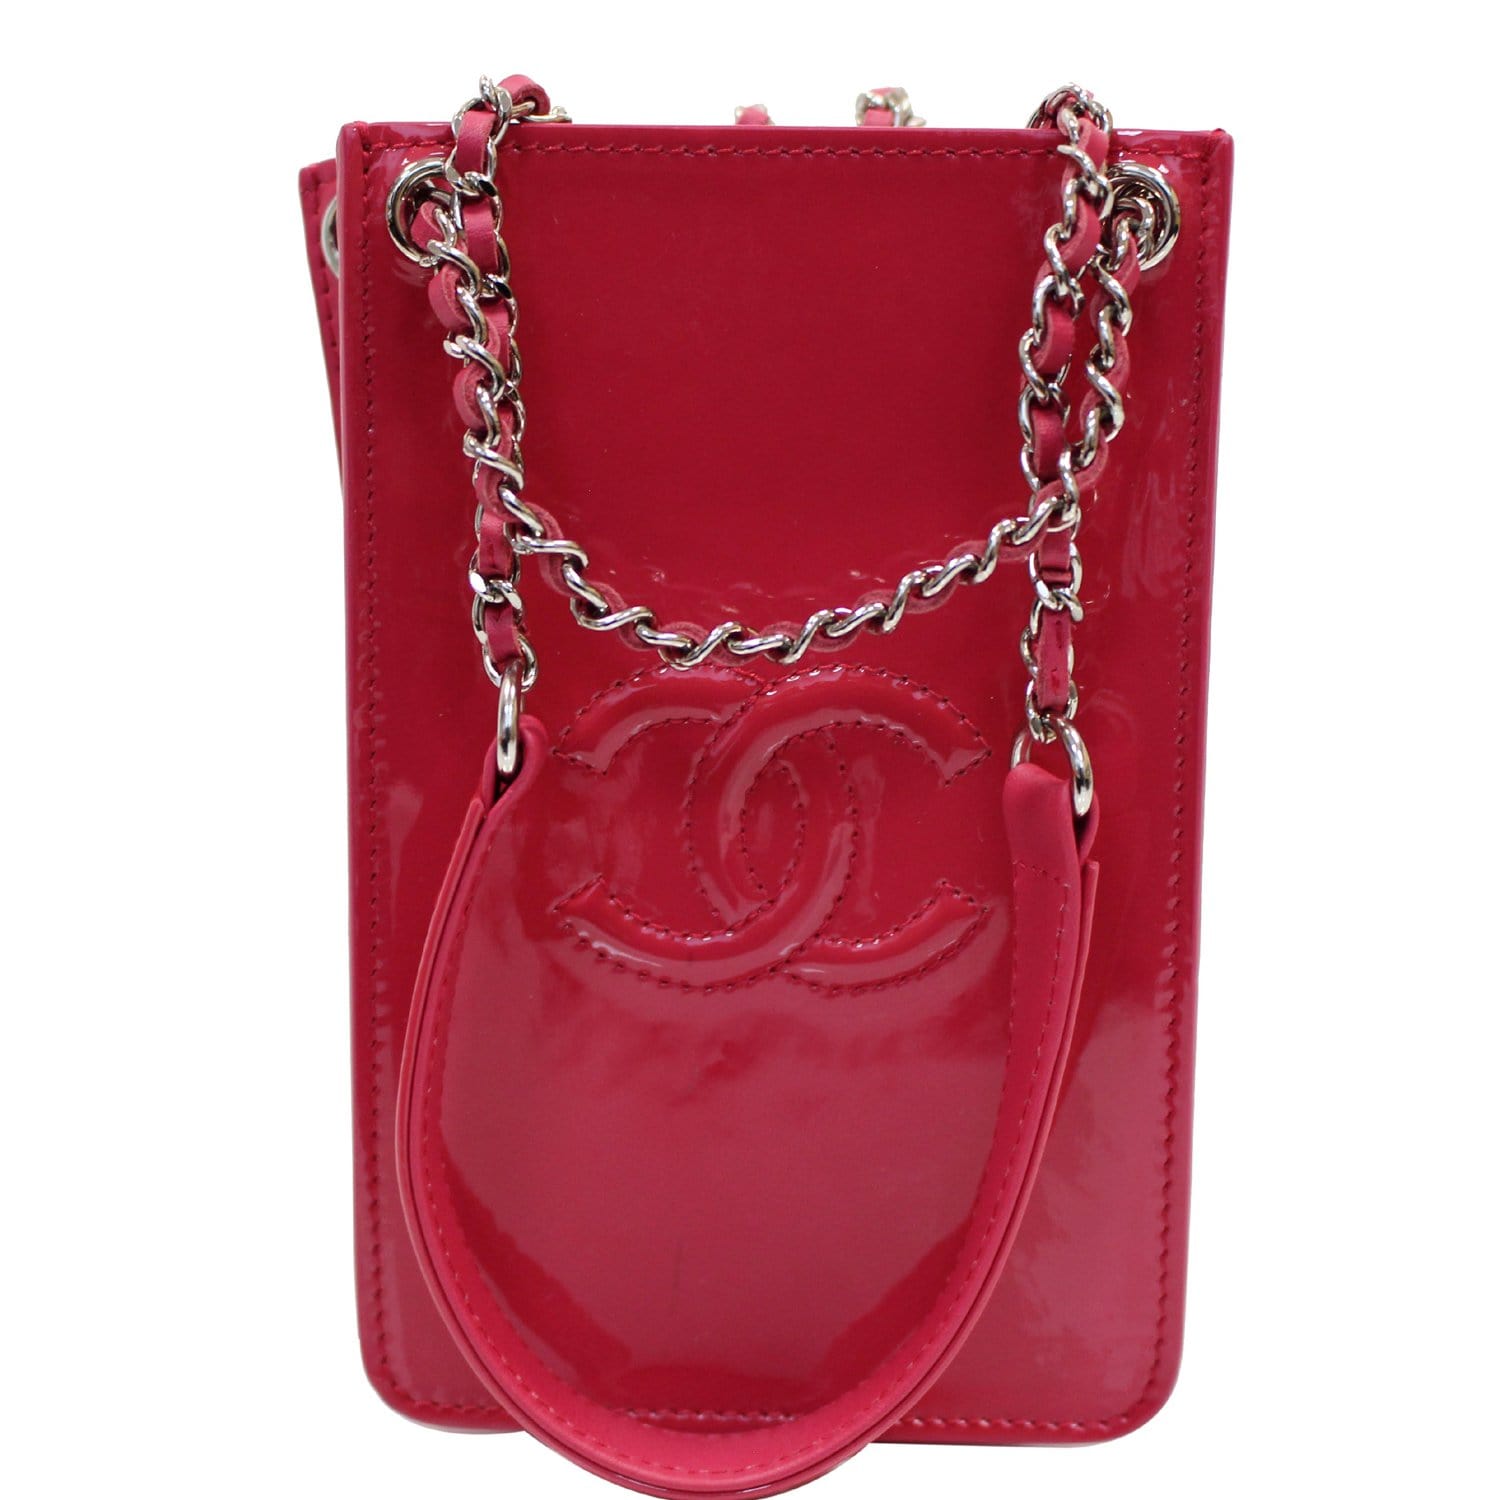 CHANEL, Bags, Chanel New Cosmetic Pencil Pouch Red Cc Logo Wristlet Strap